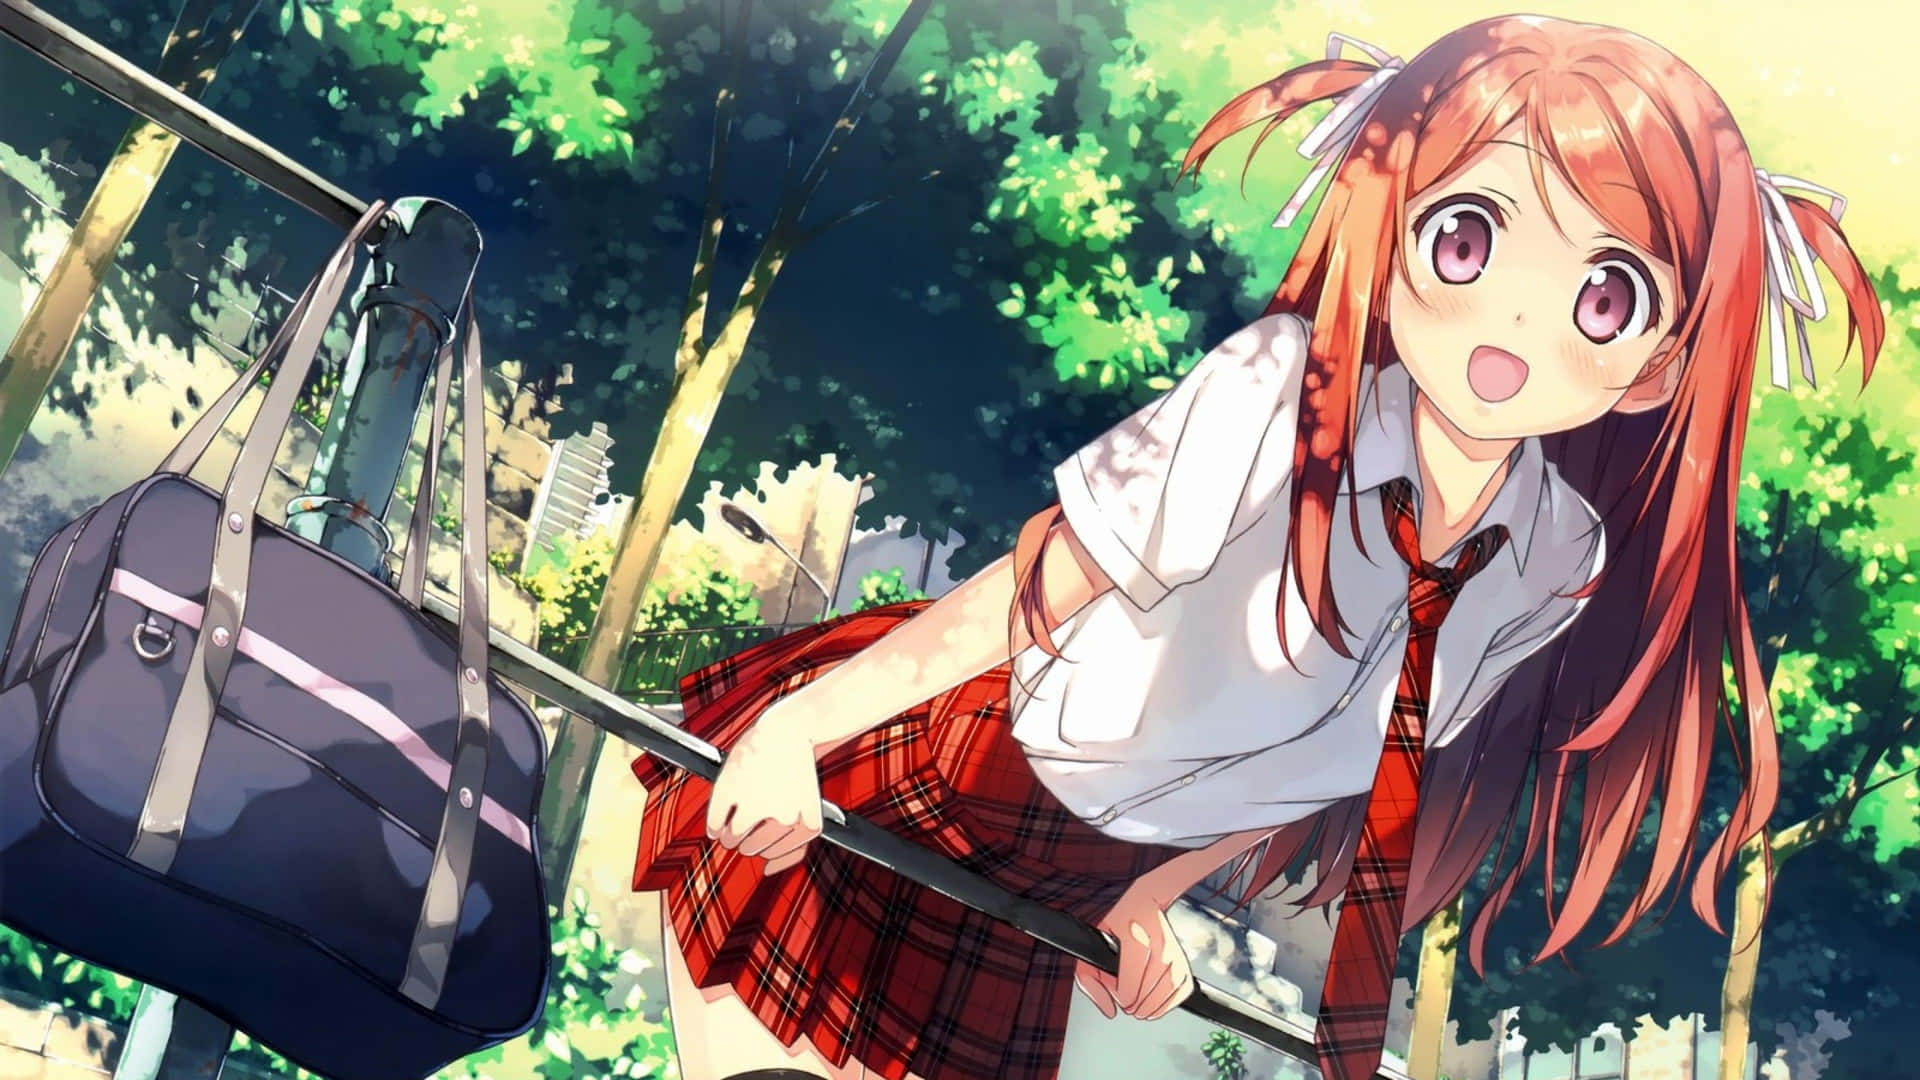 Surprised Anime Girl With Bag Wallpaper